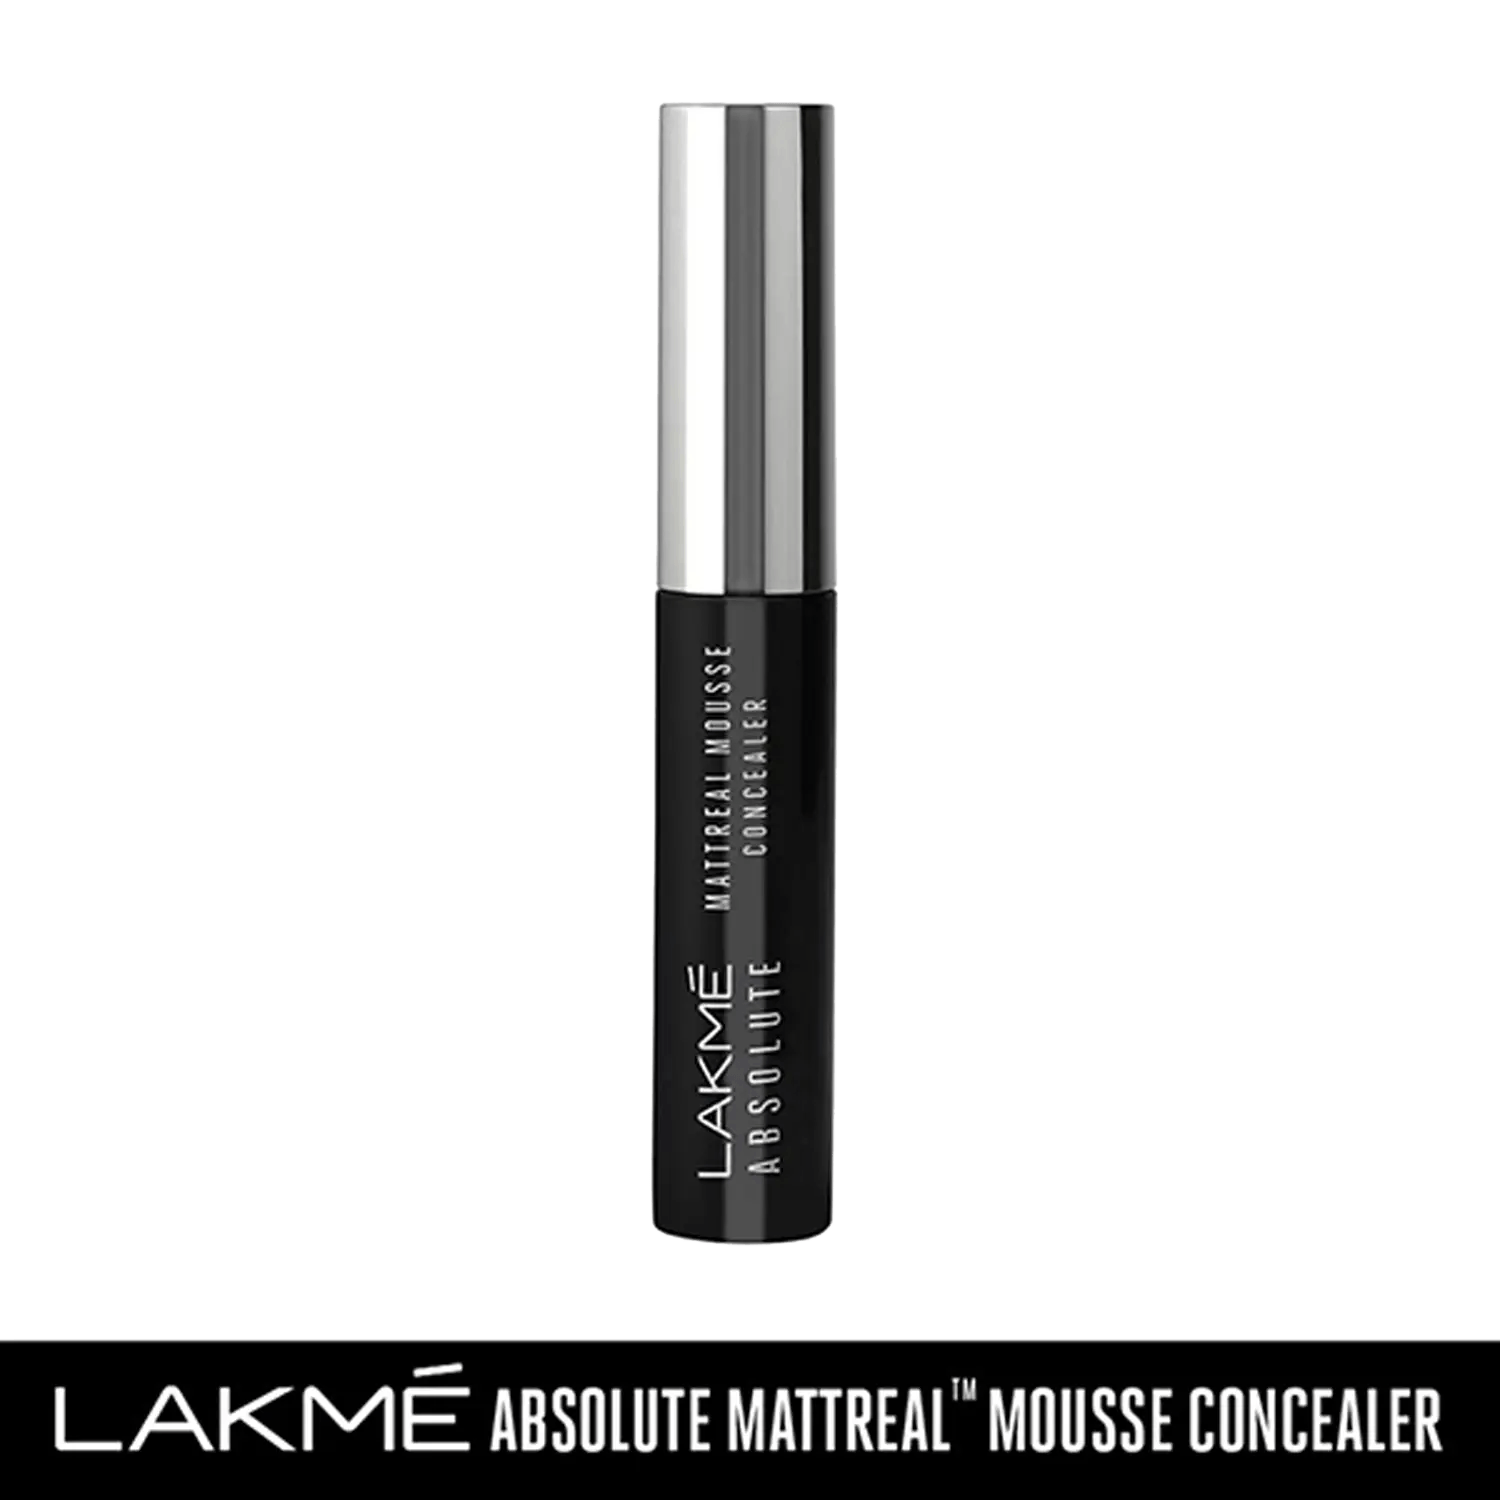 Lakme | Lakme Absolute Mattereal Mousse Concealer - 02 Natural (9g)